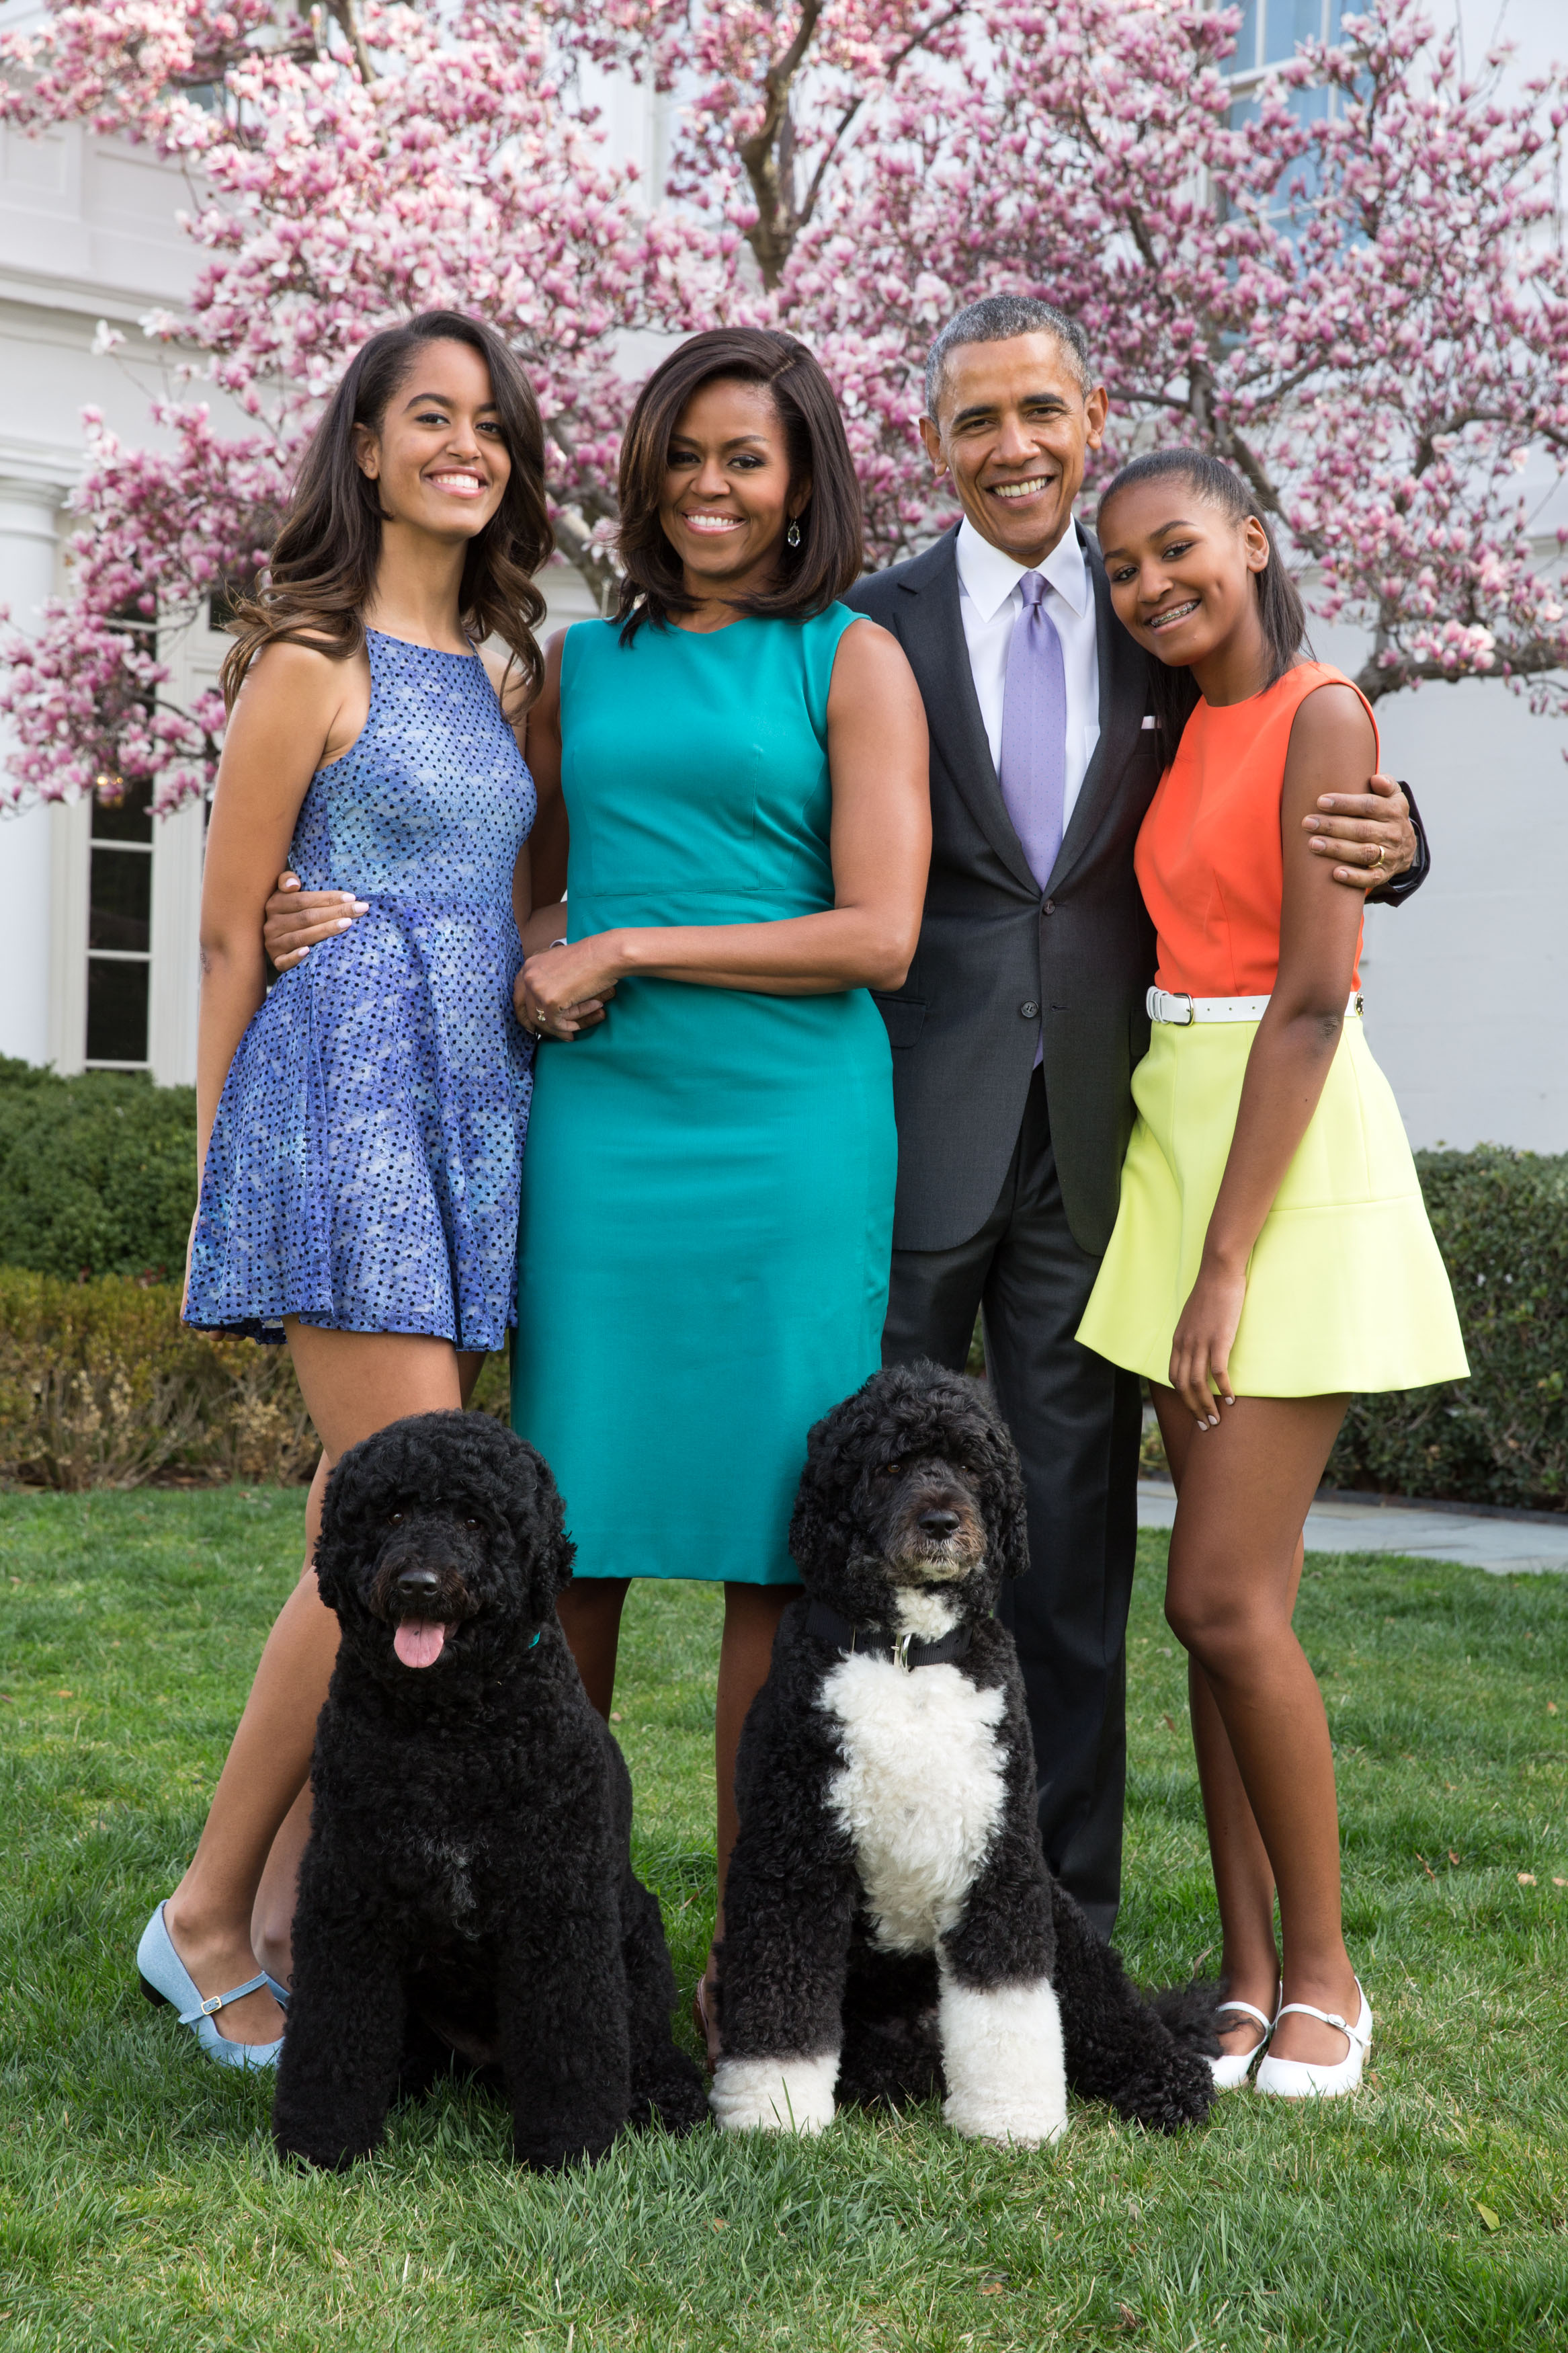 Malia, Michelle, Barack, and Sasha Obama posing in front of The White House as The First Family with their pets in Washington, 2015 | Source: Getty Images